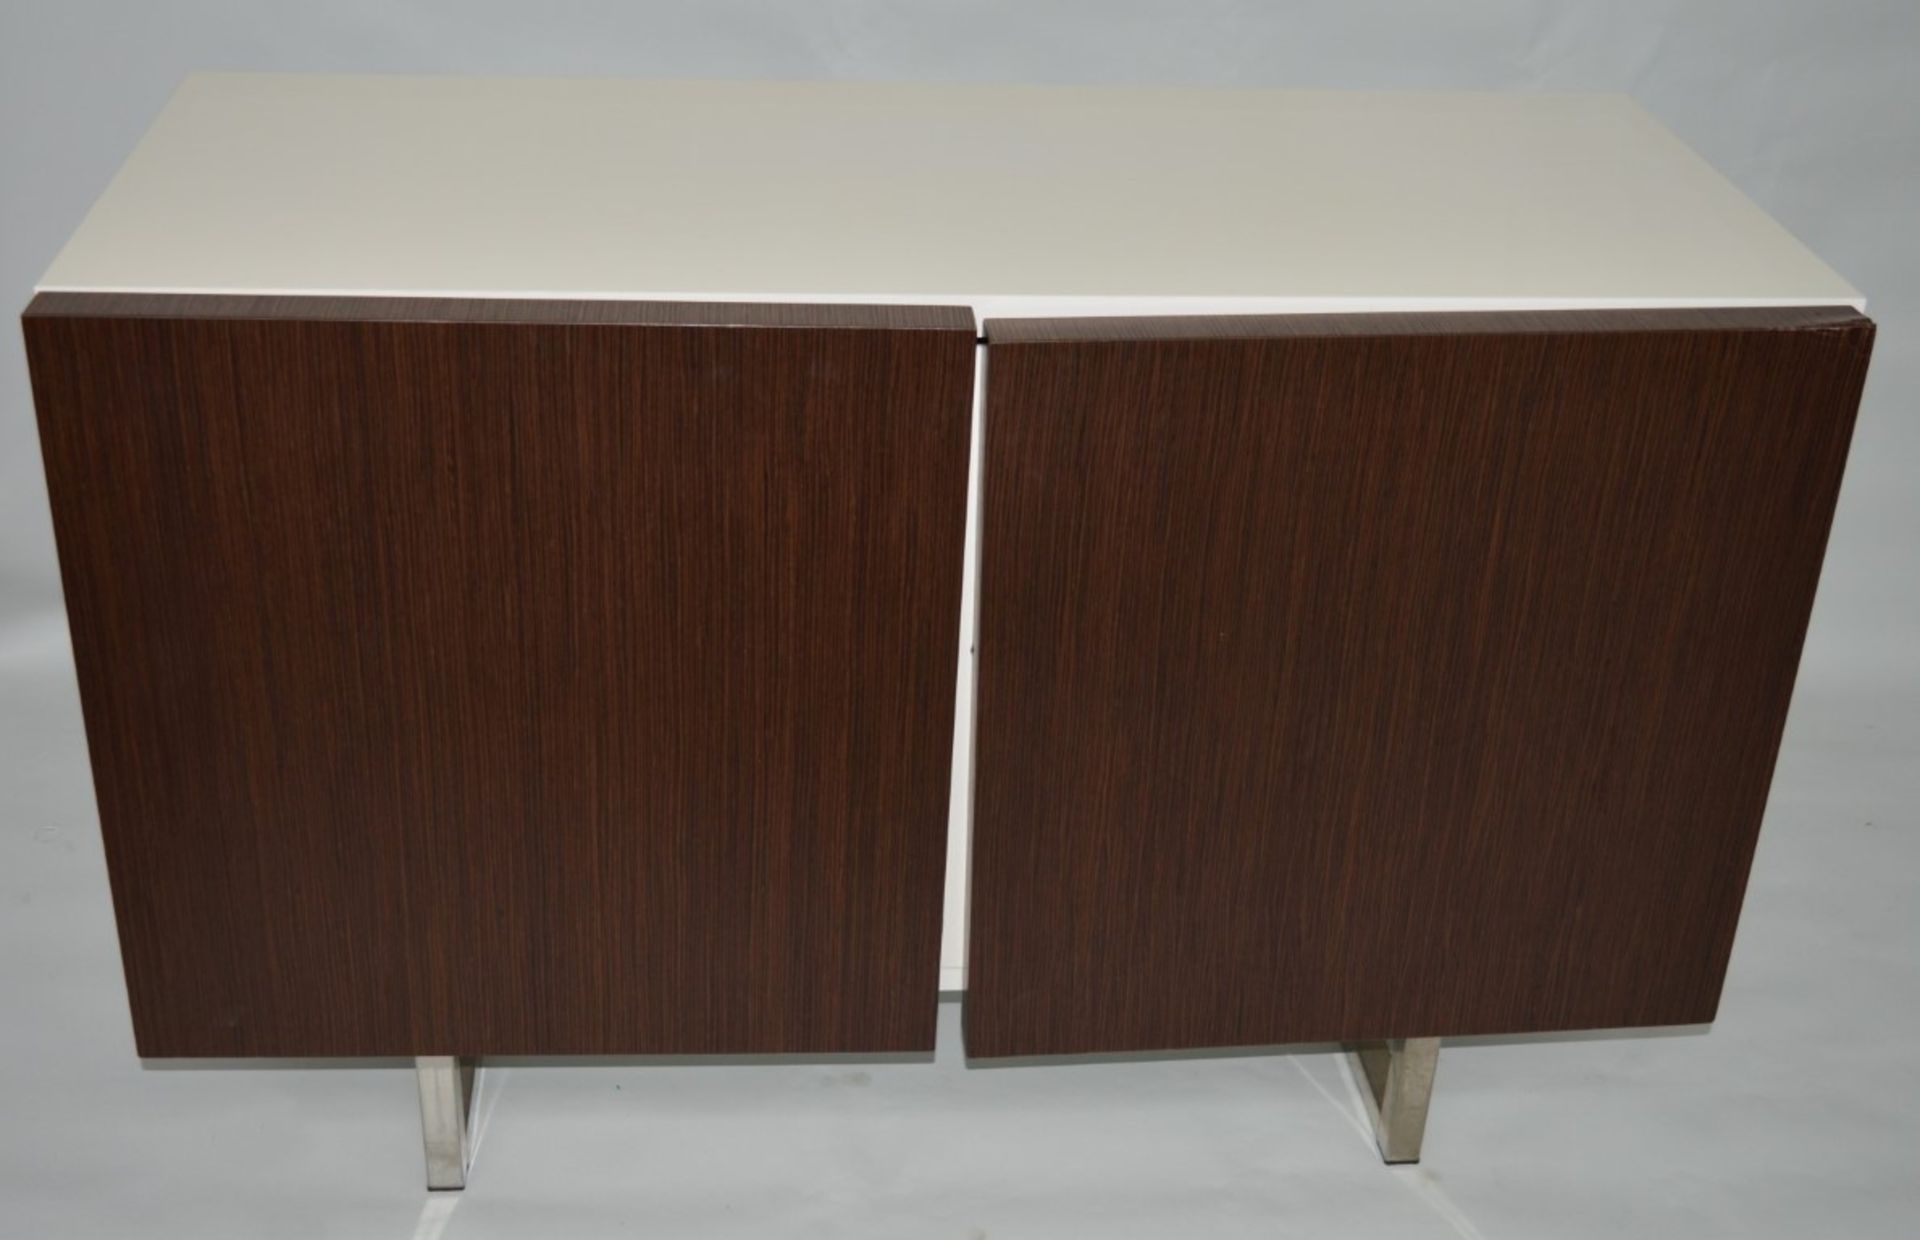 1 x Calligaris Seattle Glossy White 2 Door Sideboard - (cs6004-1) - Ref: 1670447 - CL087 - Location: - Image 5 of 7